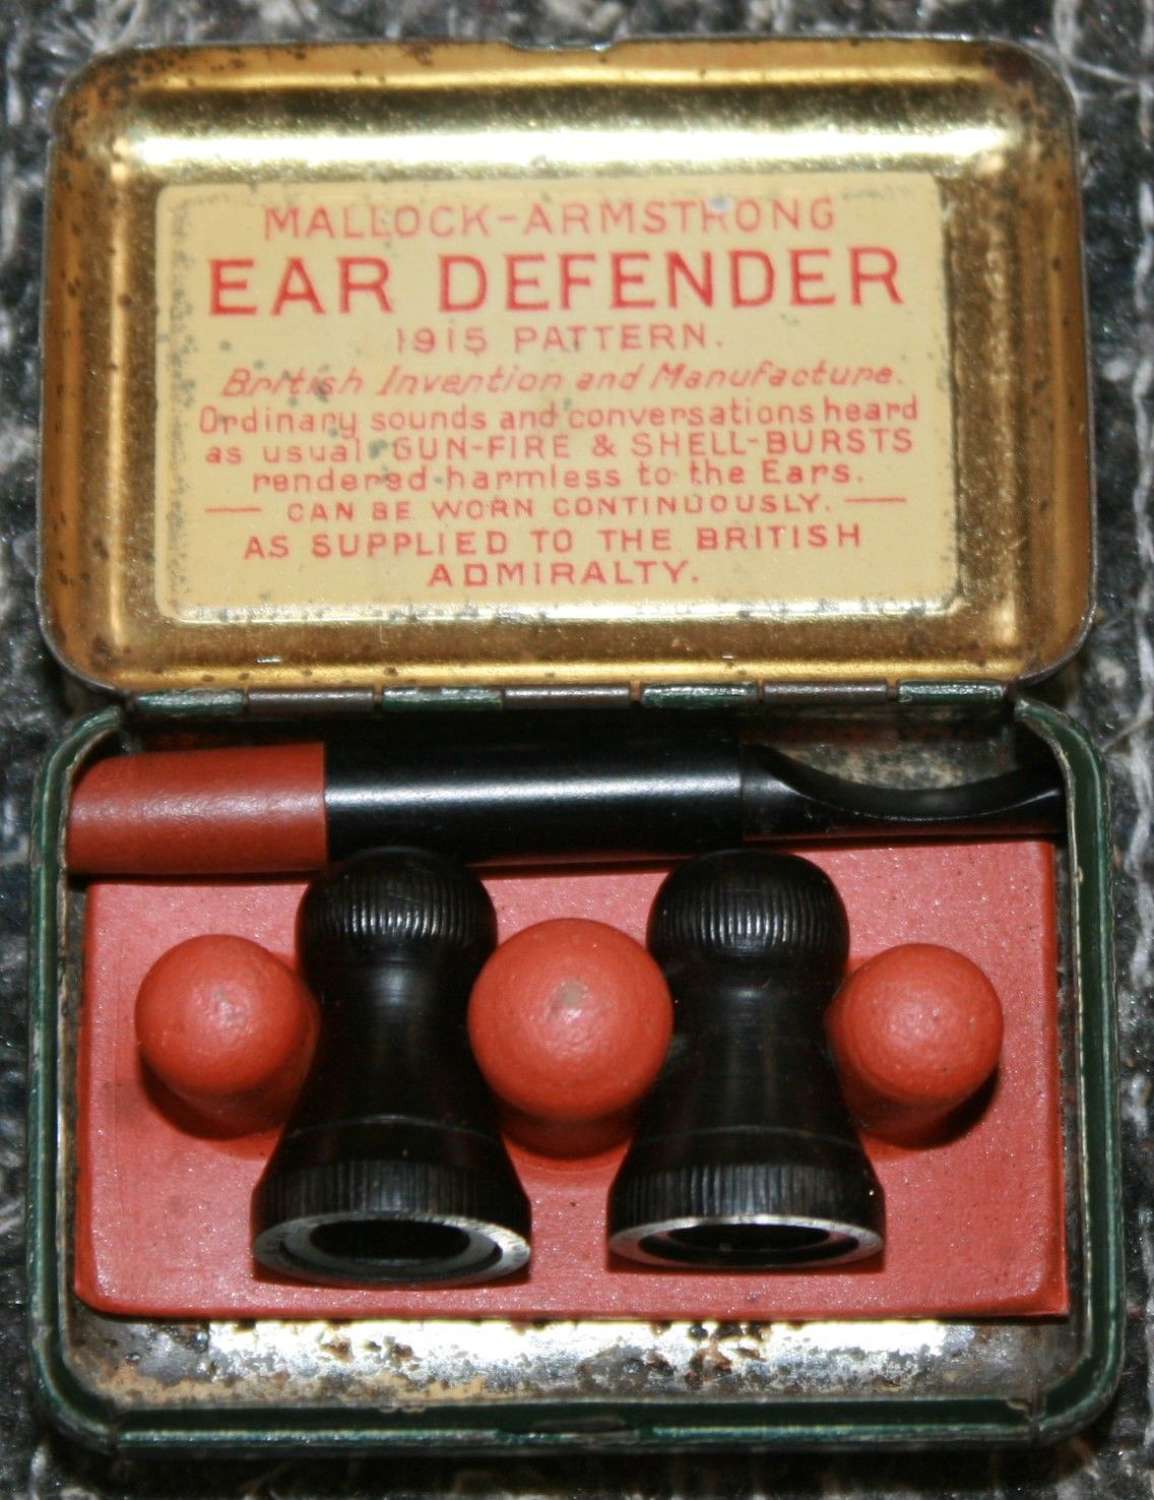 A CASED PAIR OF WWI PERIOD MALLOCK-ARMSTRONG EAR DEFENDERS